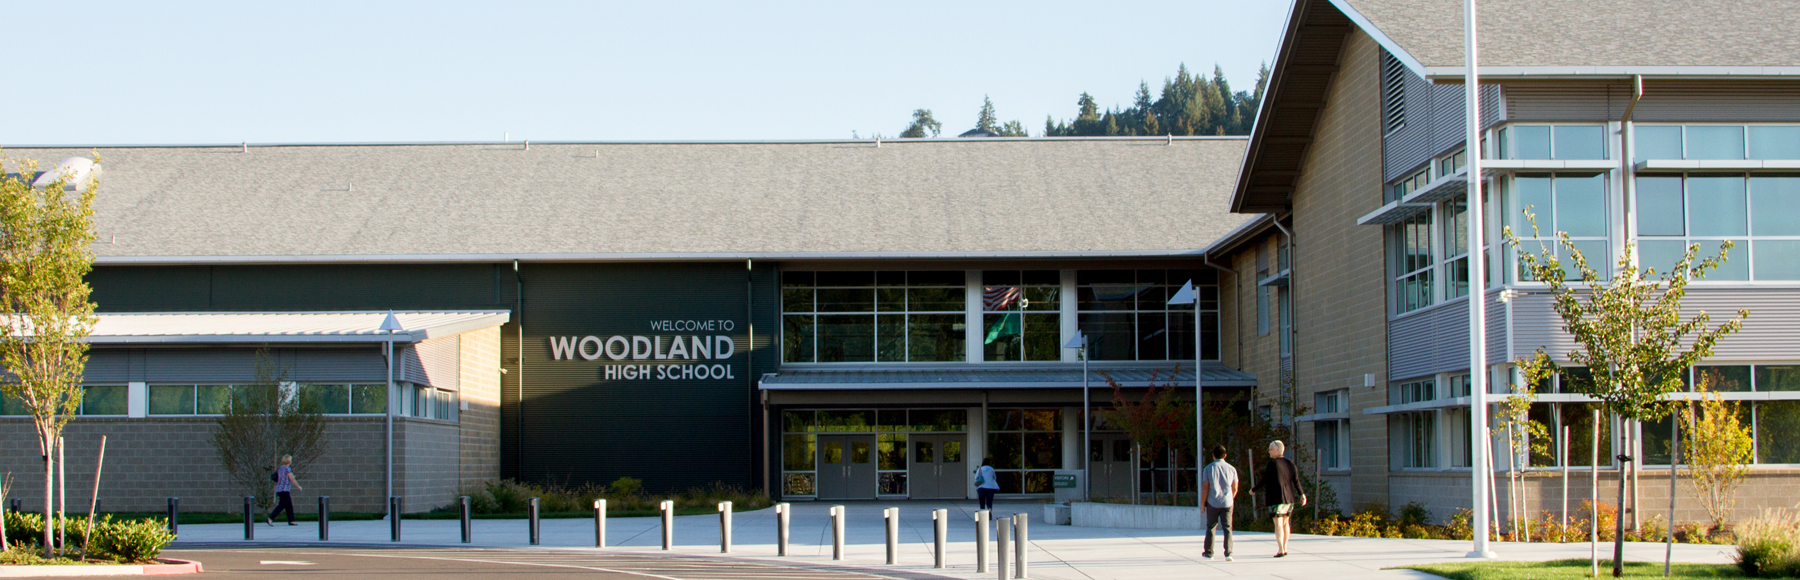 Students at Woodland High School can earn college credit.